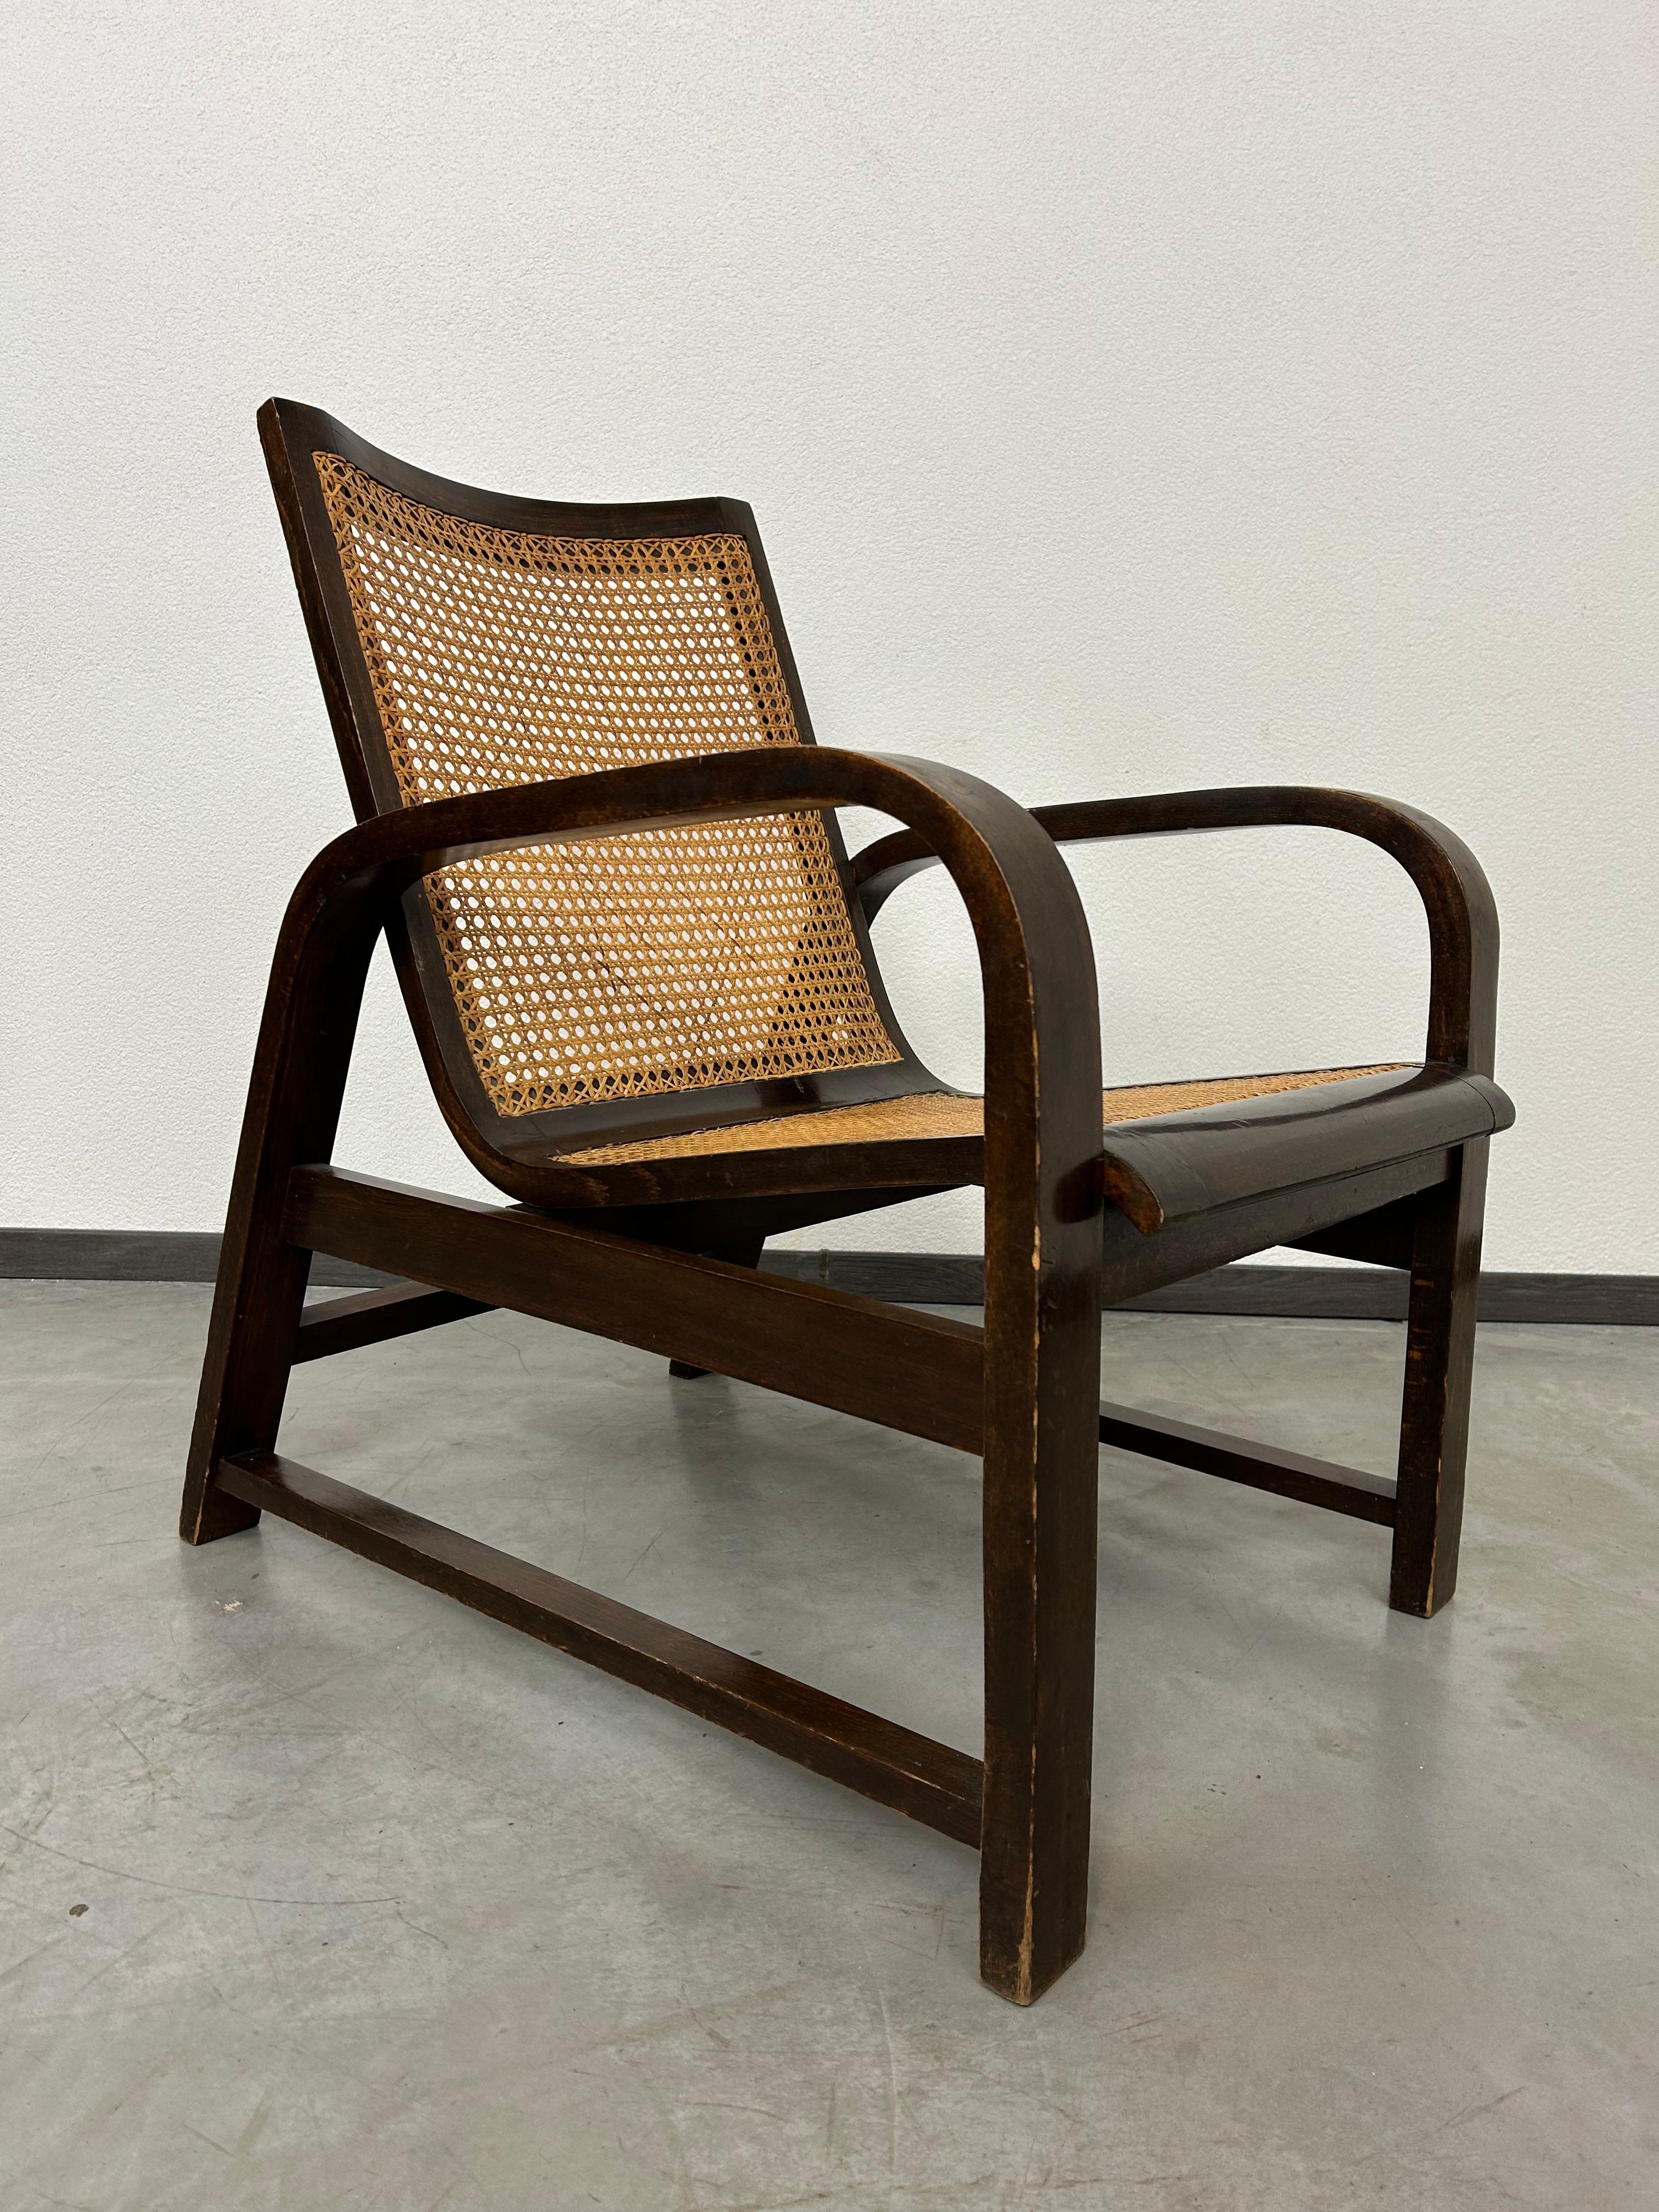 Czech Functionalist bentwood lounge chair by Thonet Mundus For Sale